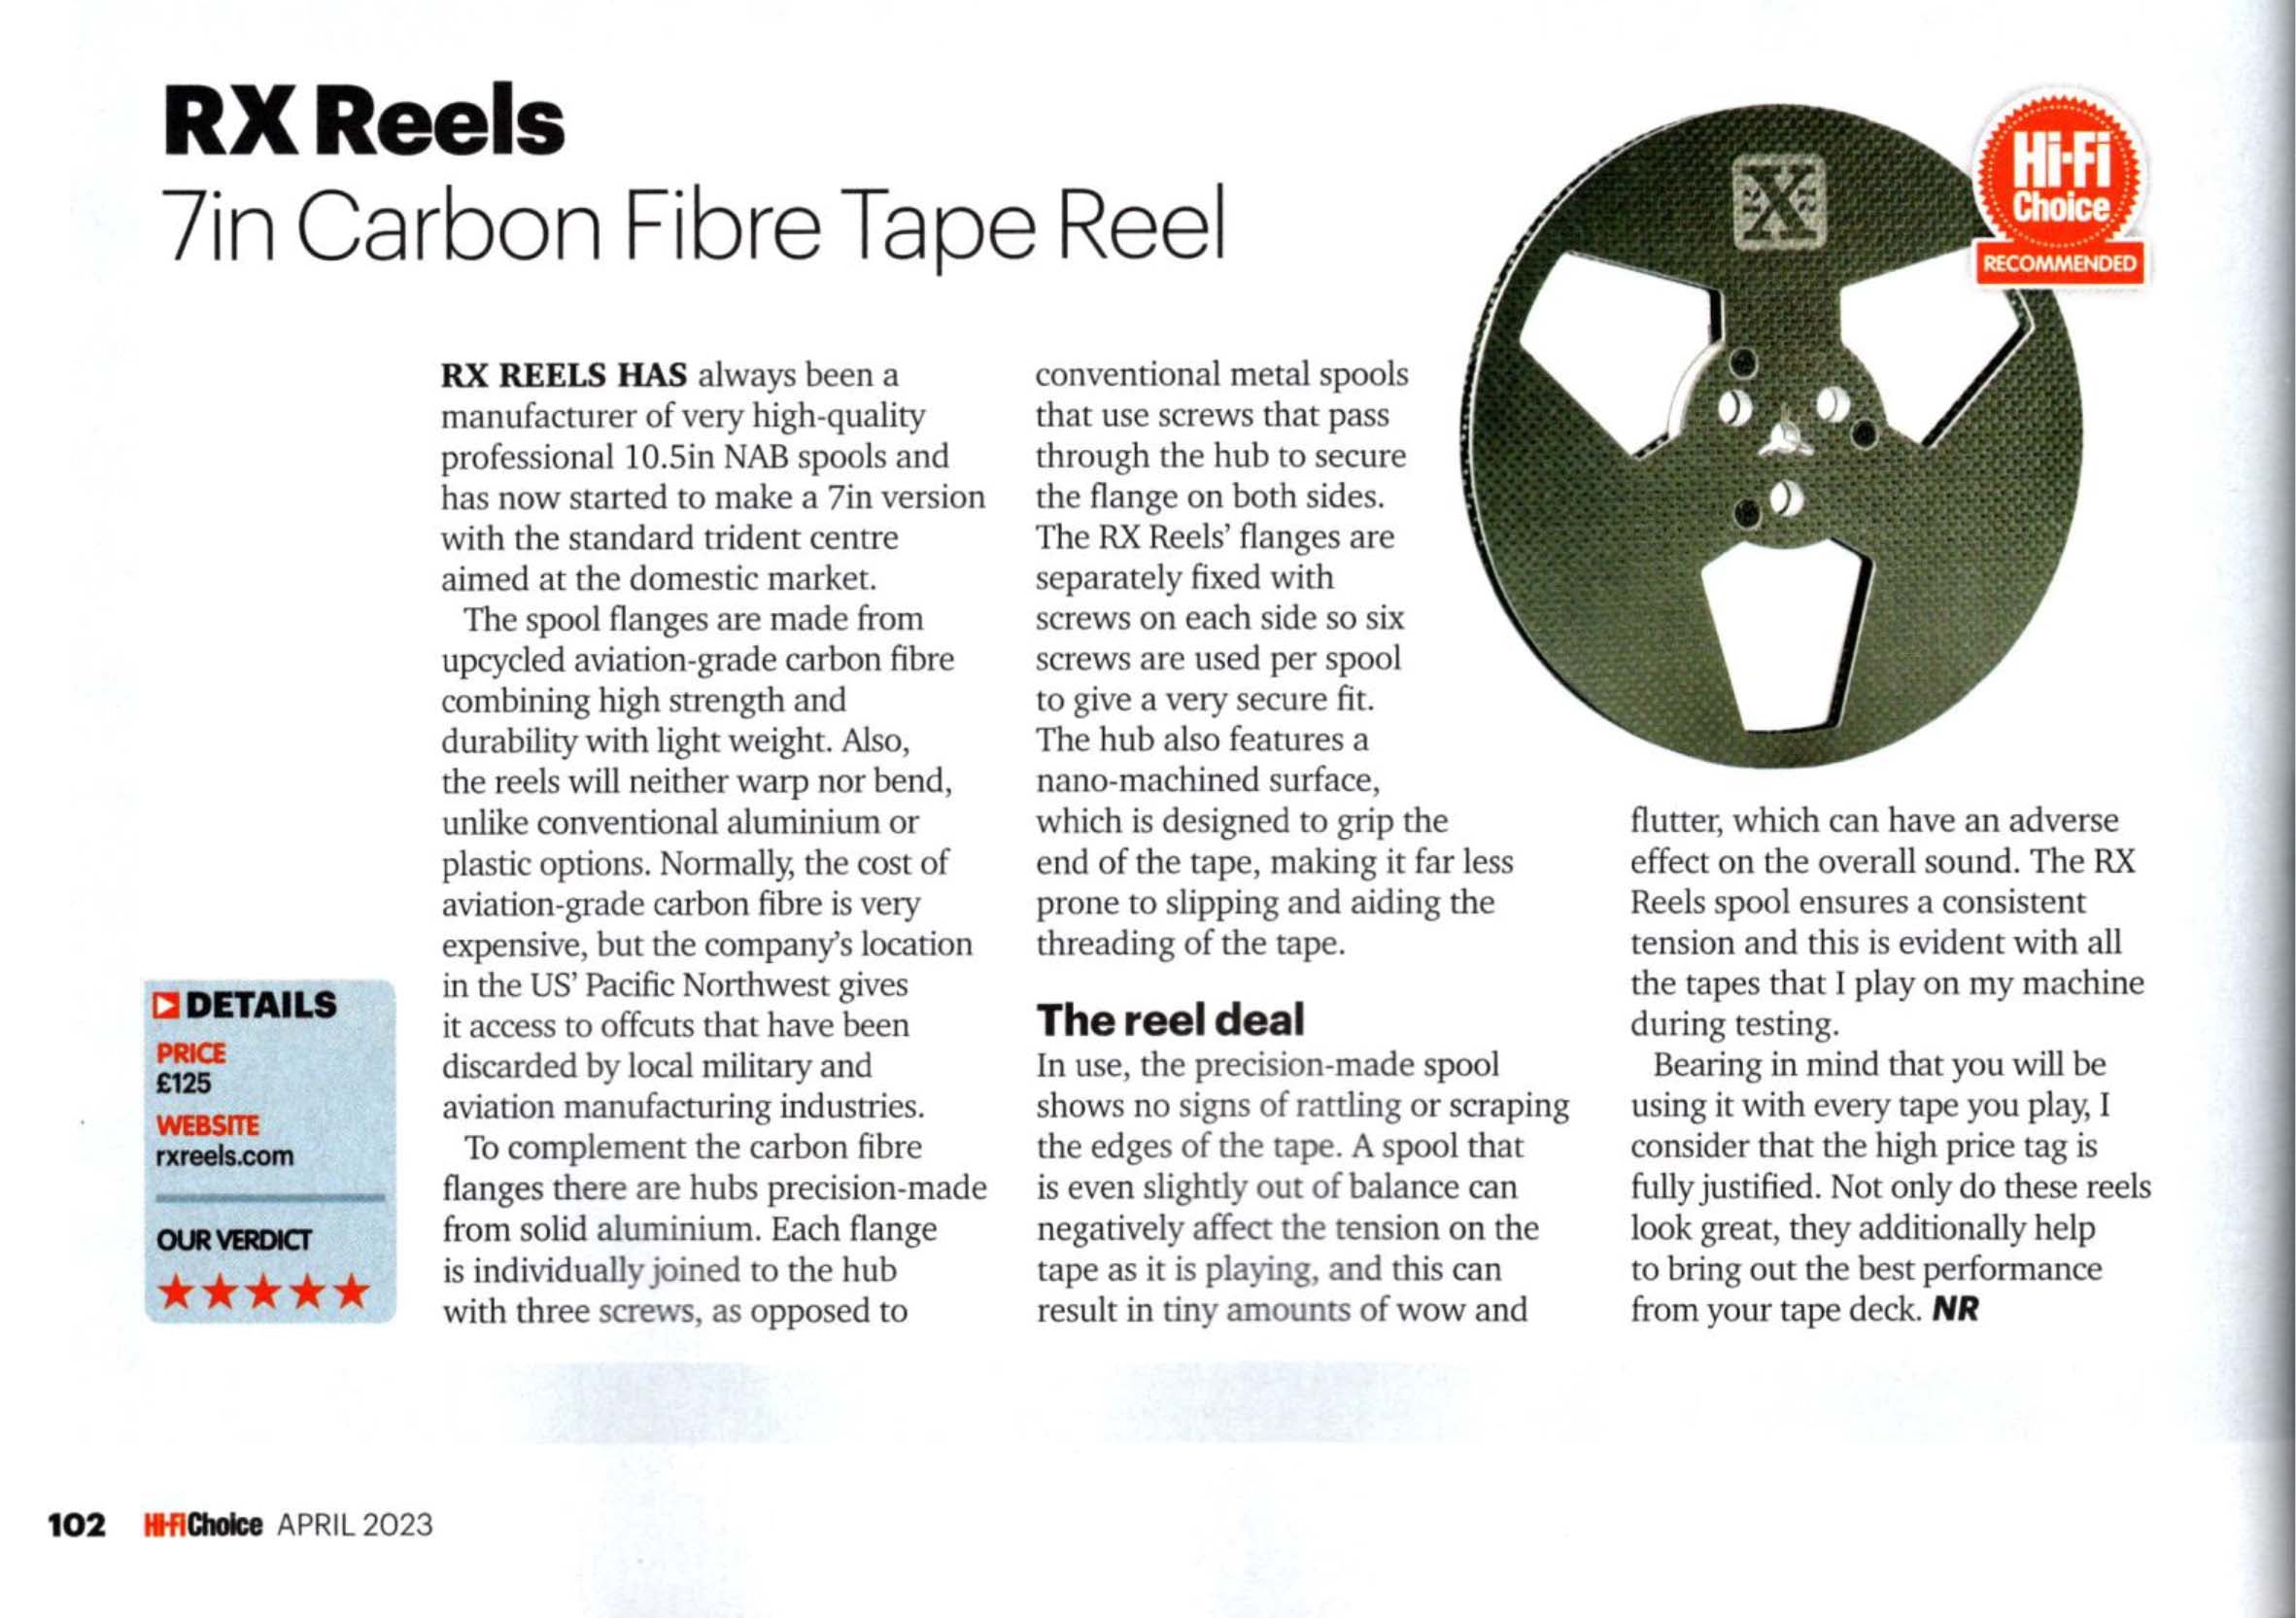 Five-star Review from Hi-Fi Choice Has Us Spinning! - RX Reels